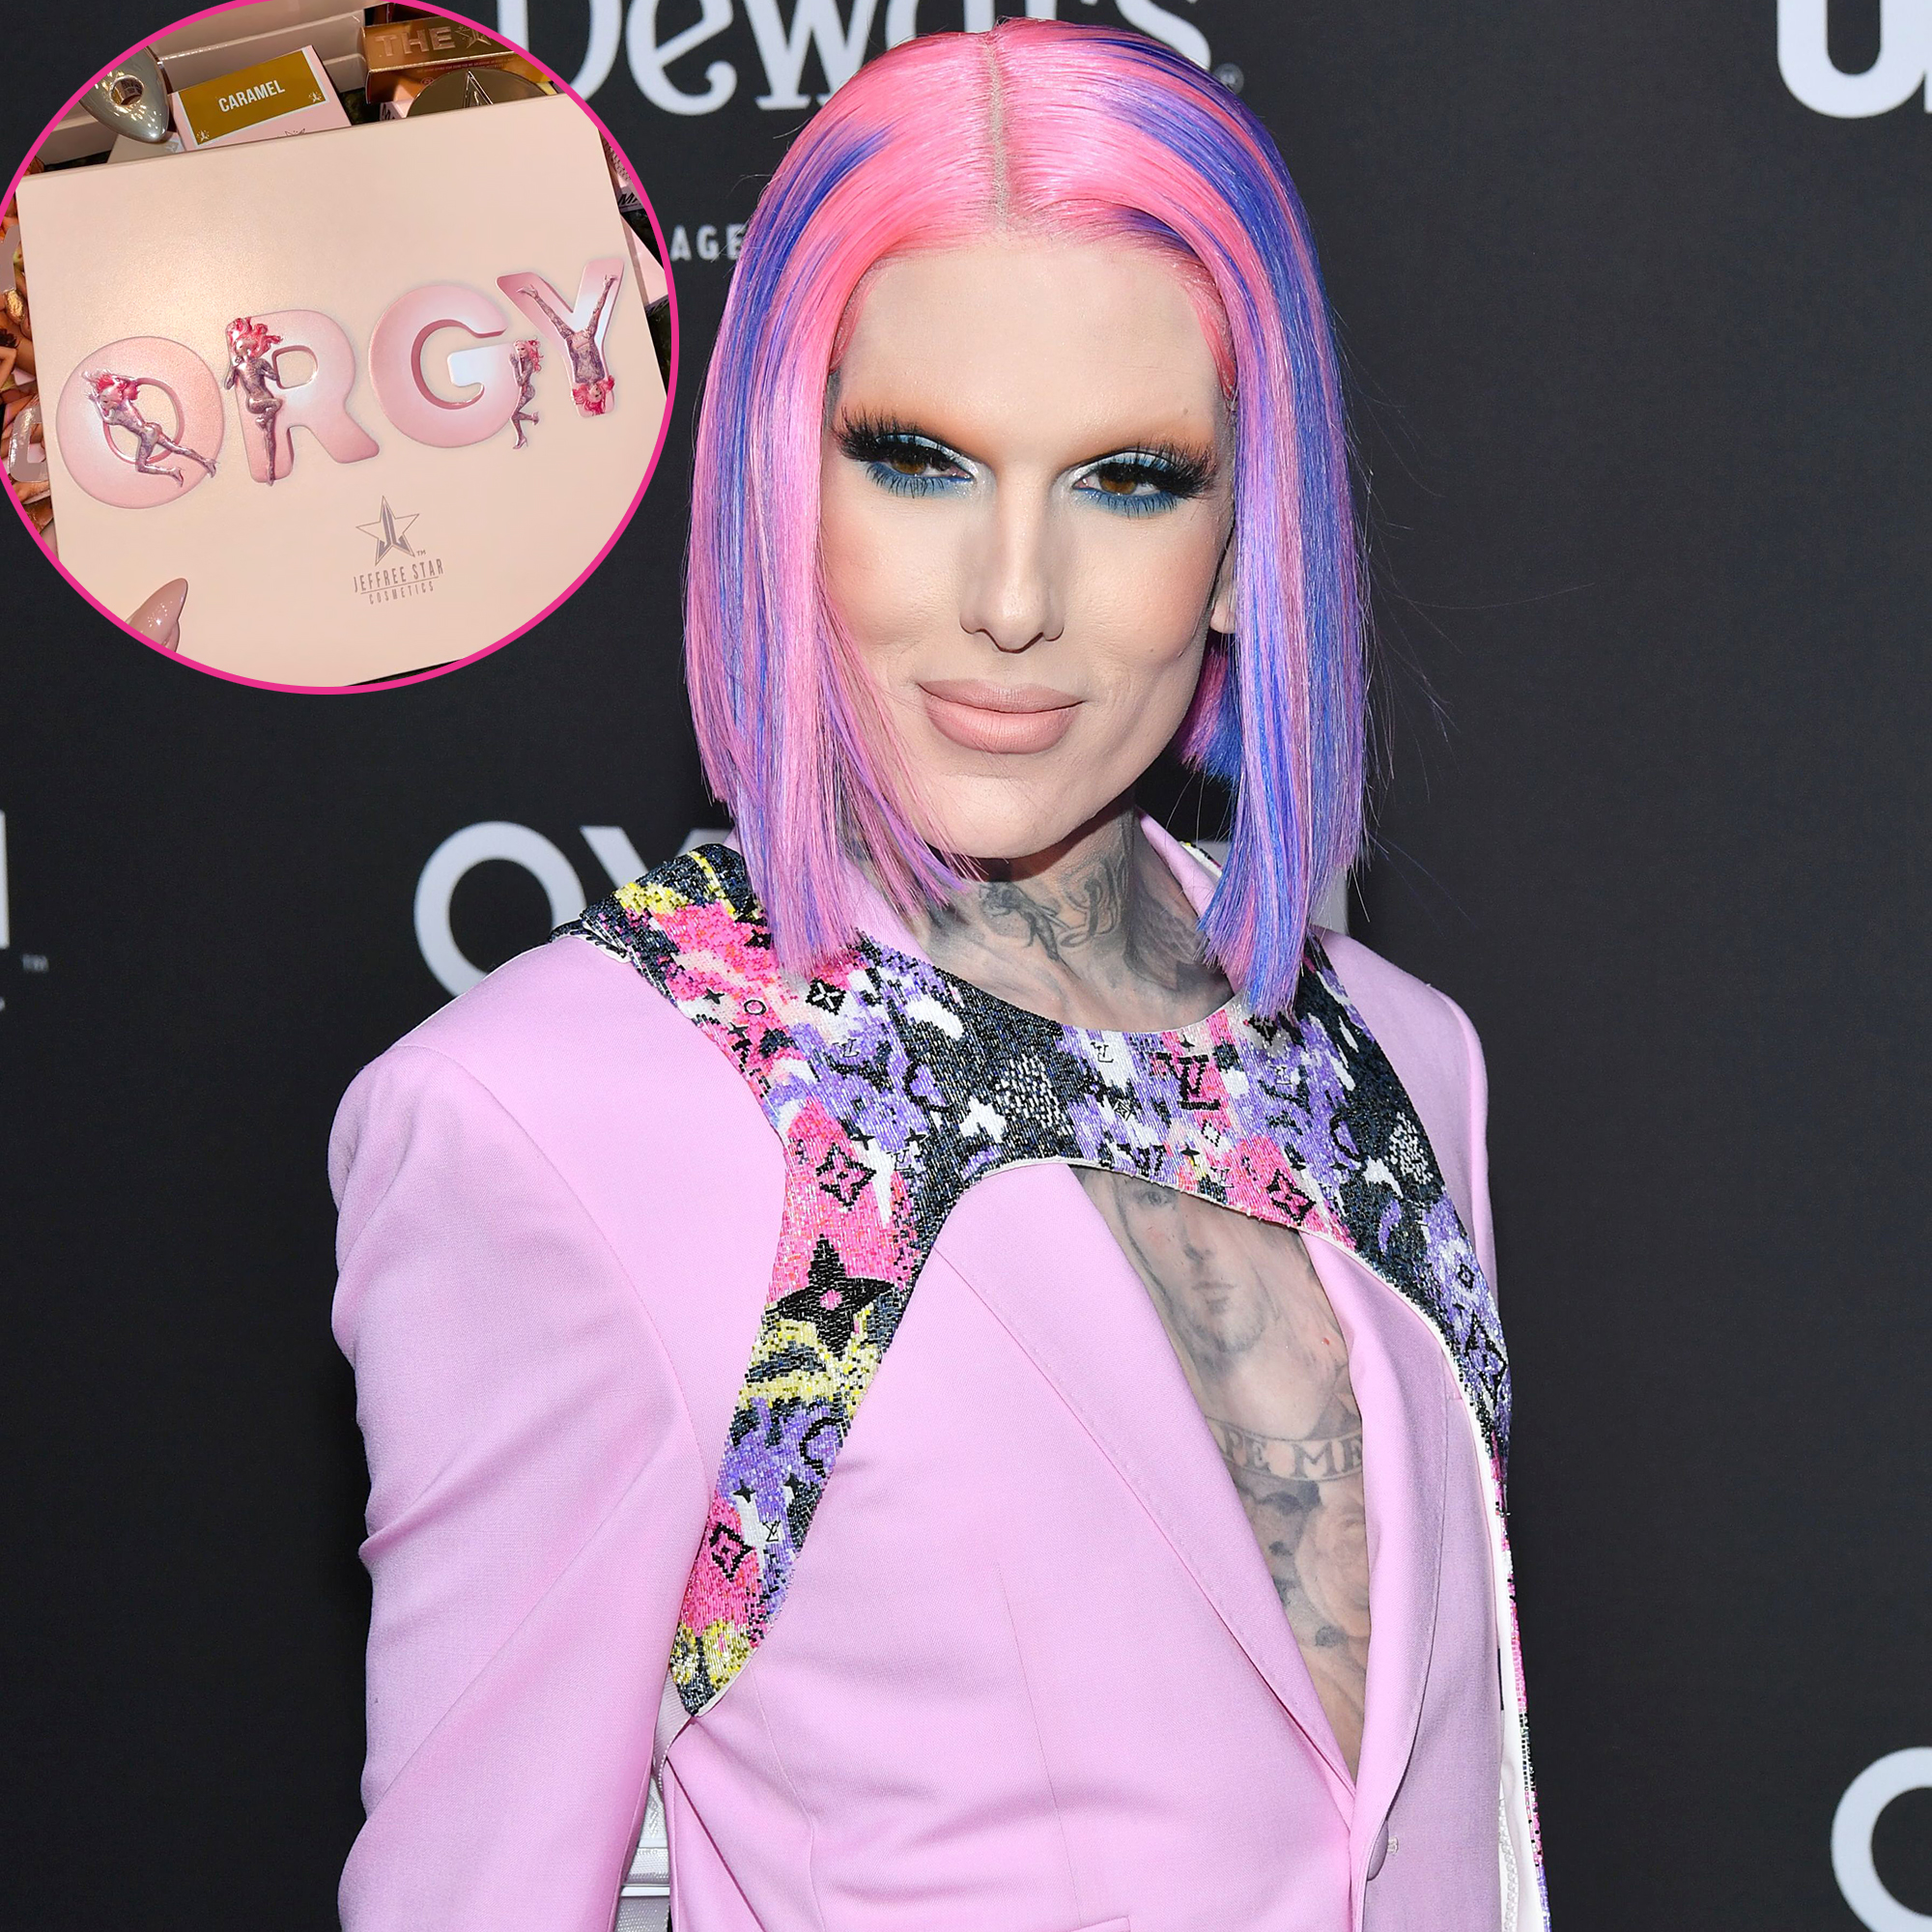 Jeffree Stars New Orgy Makeup Collection Draws Mixed Reactions